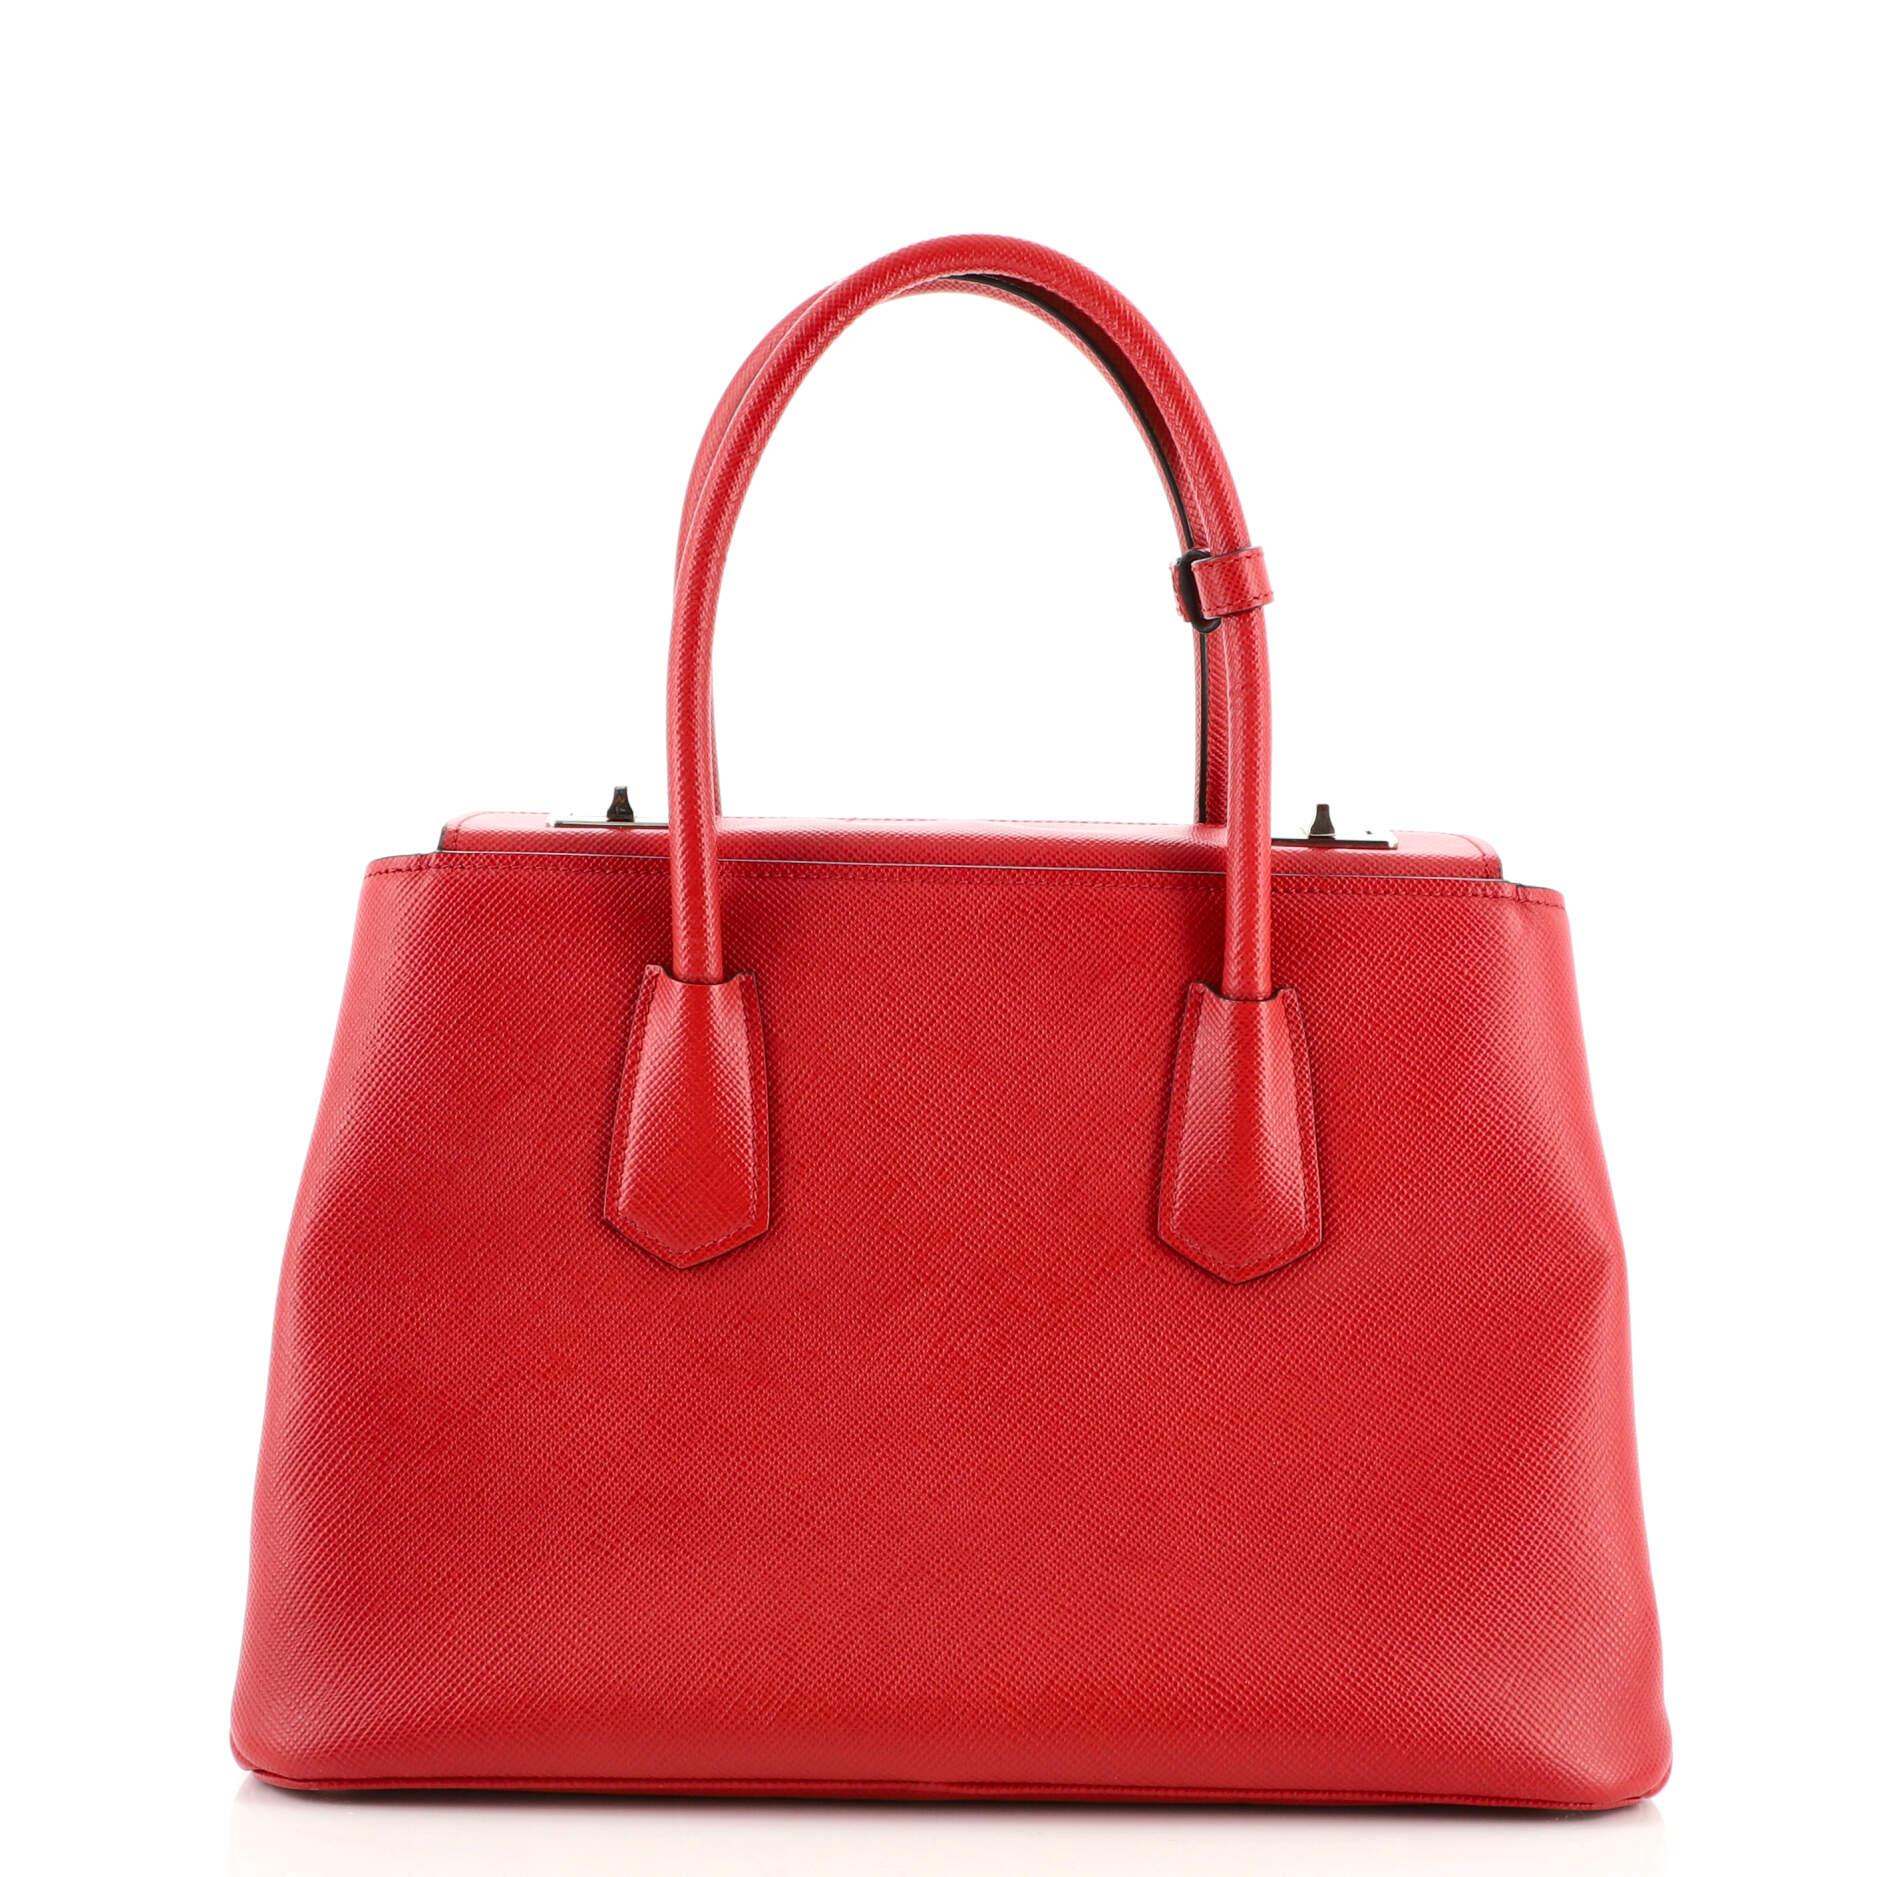 Prada Turnlock Cuir Twin Convertible Tote Saffiano Leather Medium In Good Condition In NY, NY